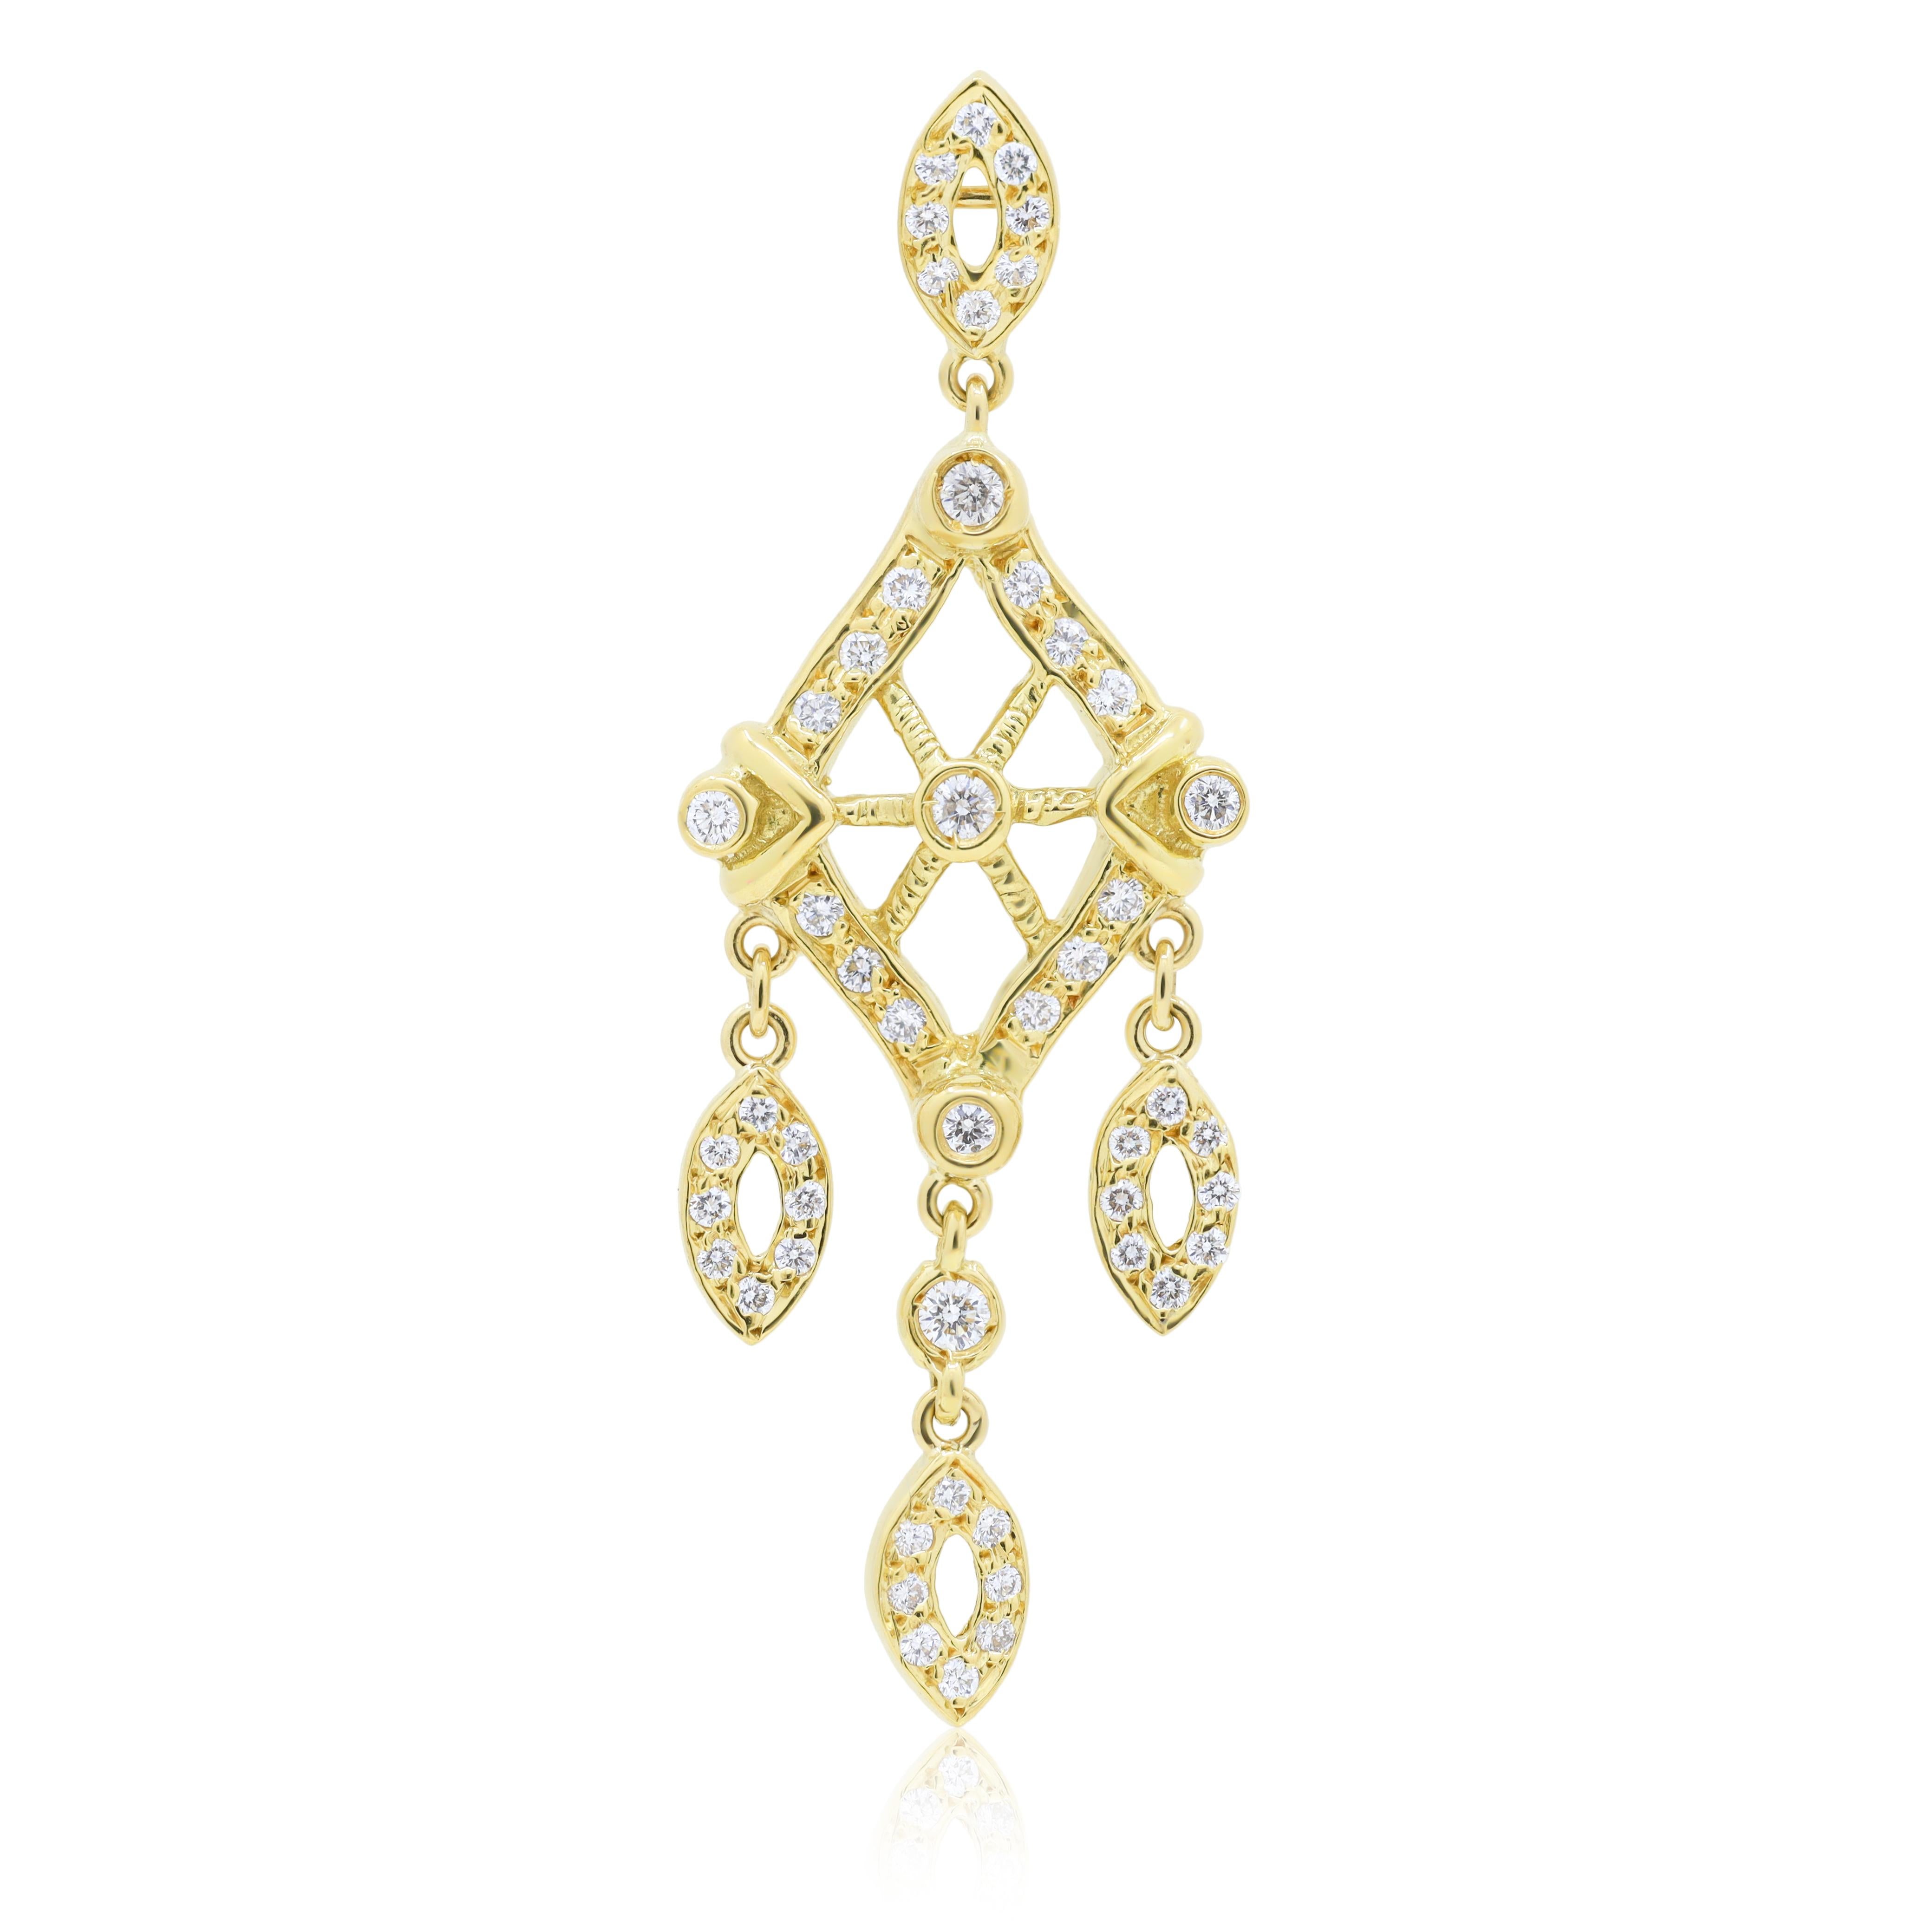 Diana M. 18kt yellow gold Pendent Woven Diamond Shape 


Diana M. is a leading supplier of top-quality fine jewelry for over 35 years.
Diana M is one-stop shop for all your jewelry shopping, carrying line of diamond rings, earrings, bracelets,